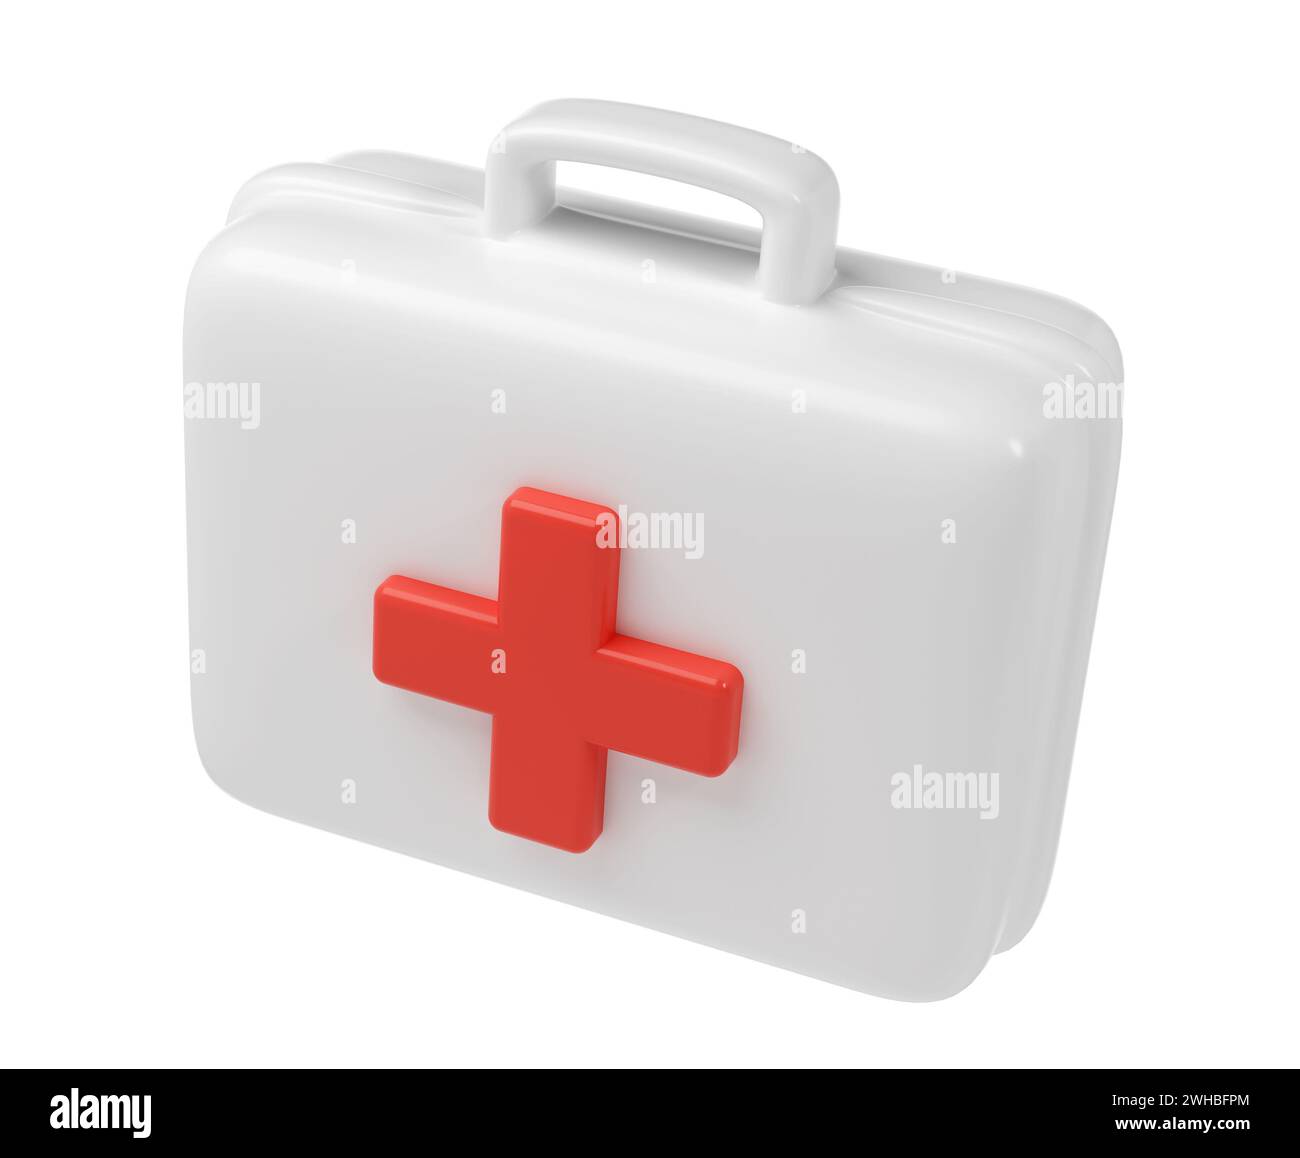 3d rendering of first aid medical box with red cross icon. Healthcare industry supplies and drugs Stock Photo